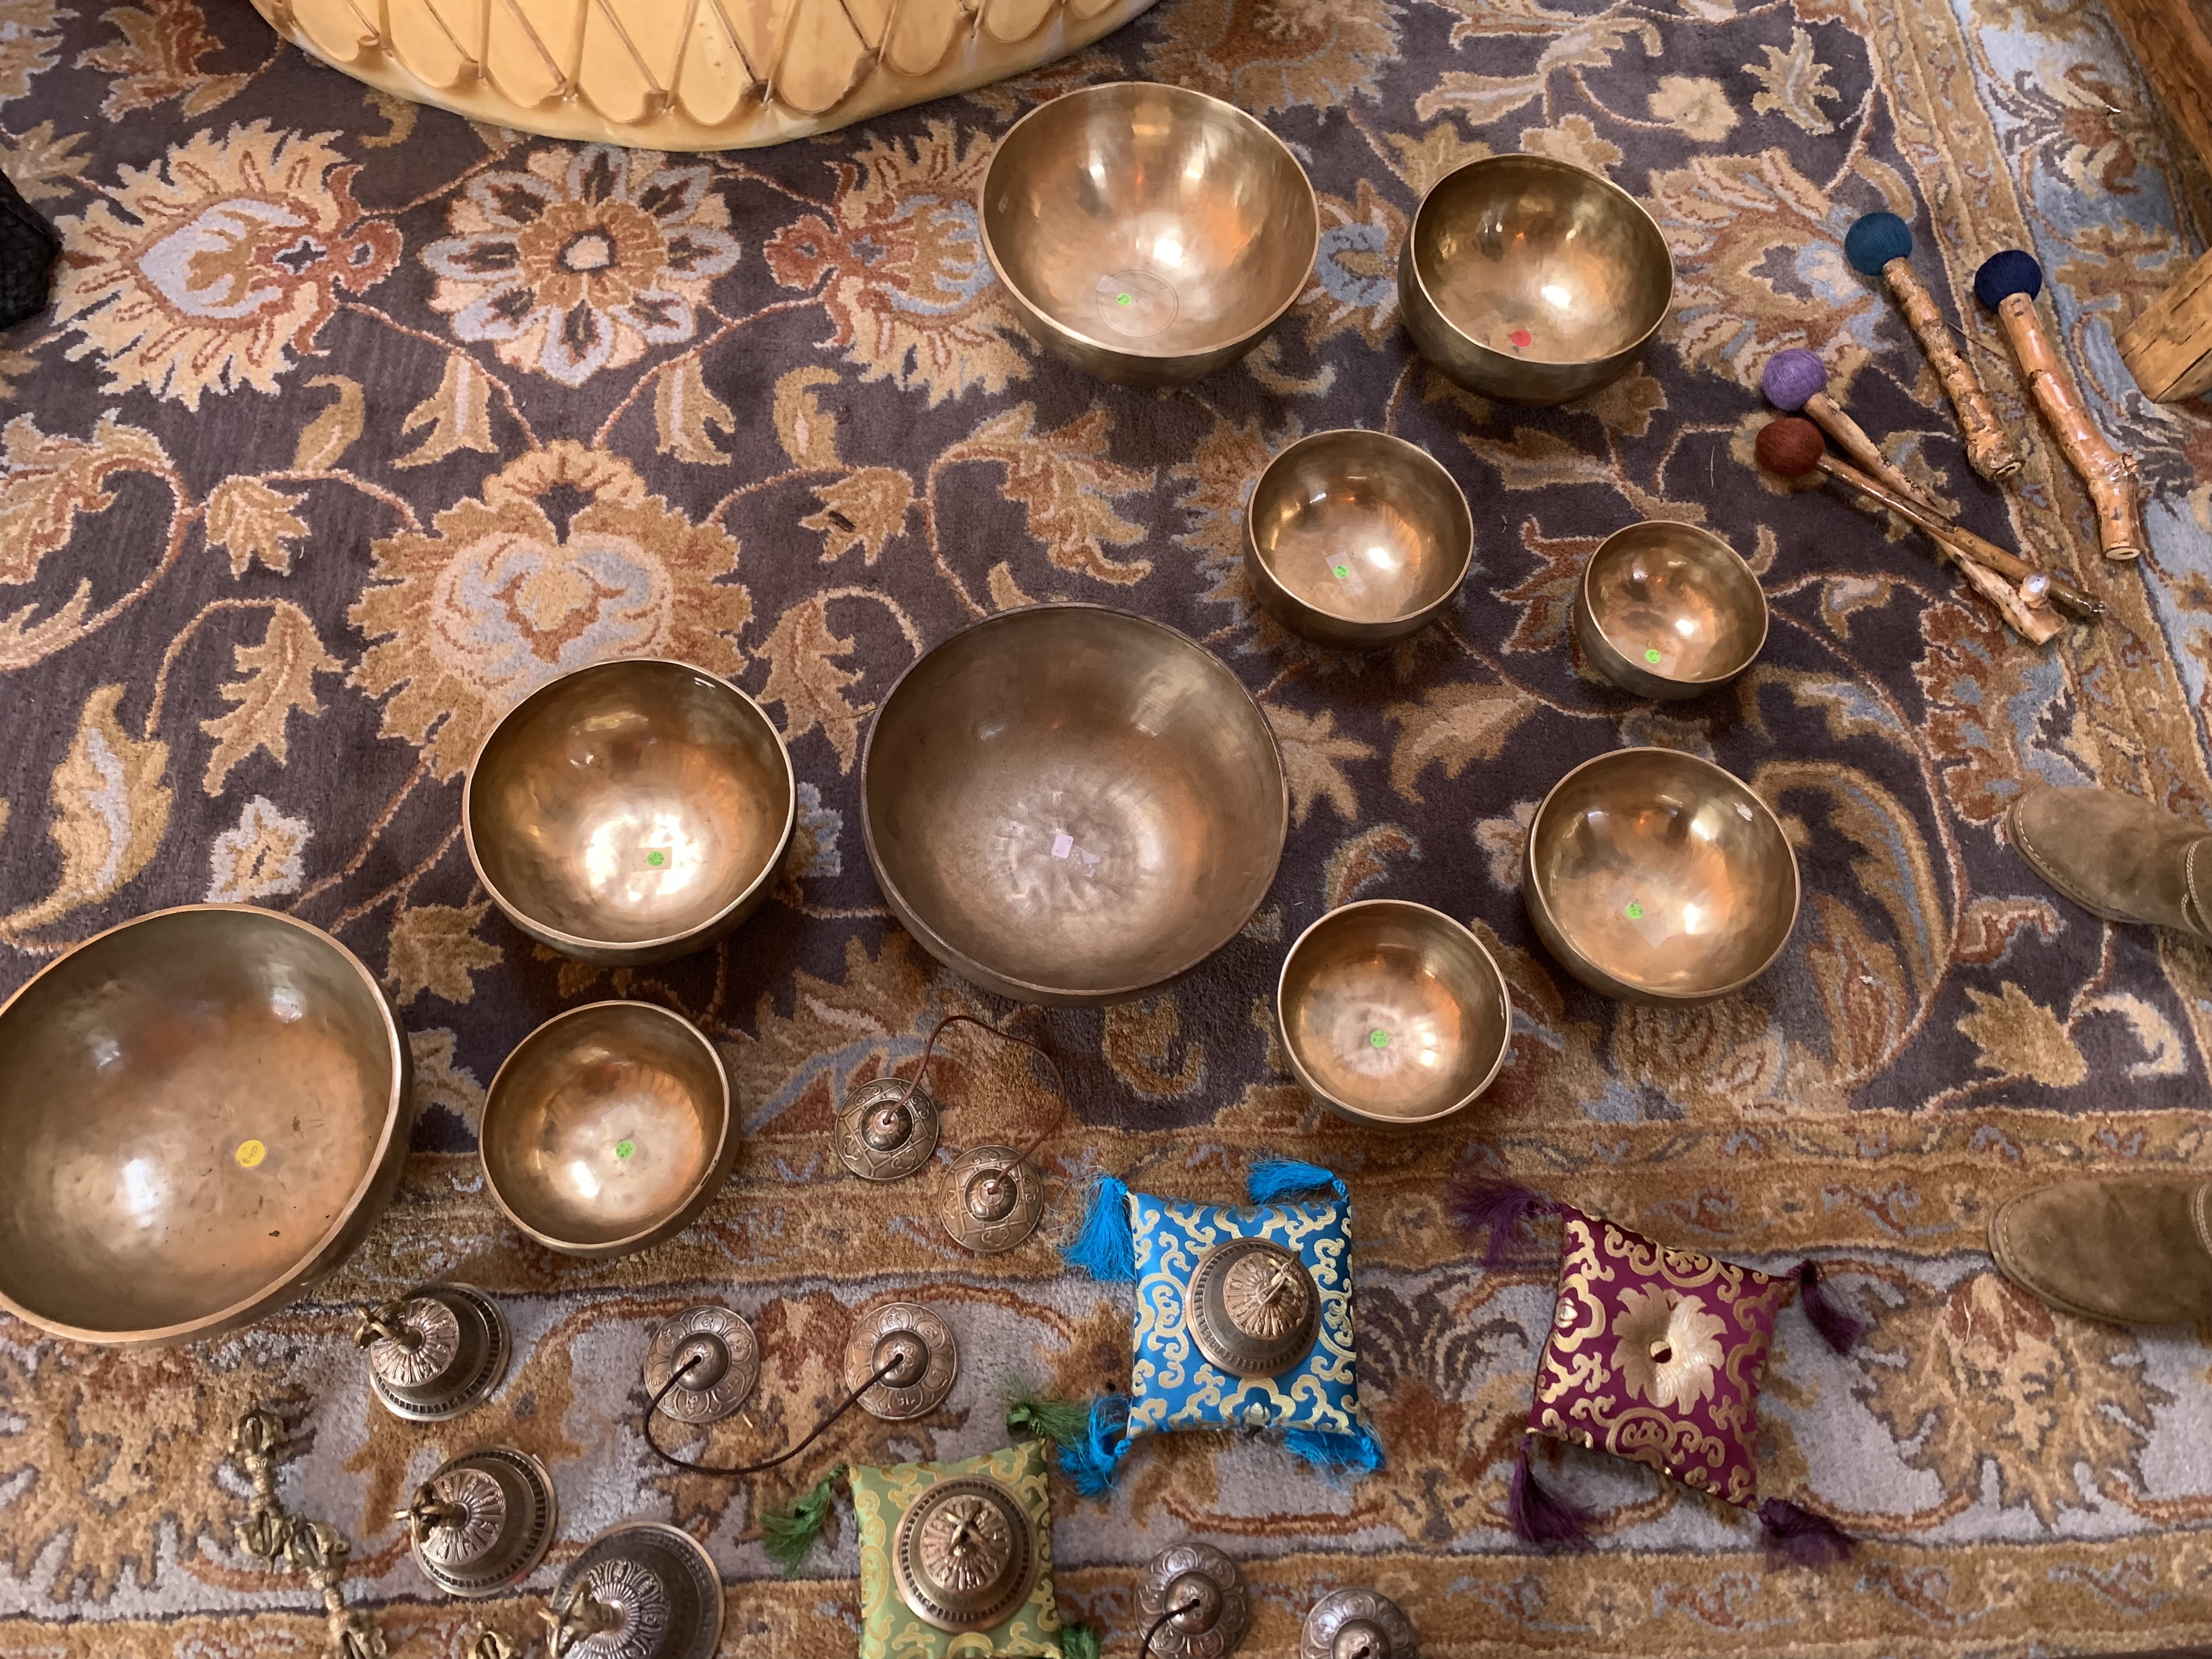 Tibetan Bowls of multiple sizes on a rug